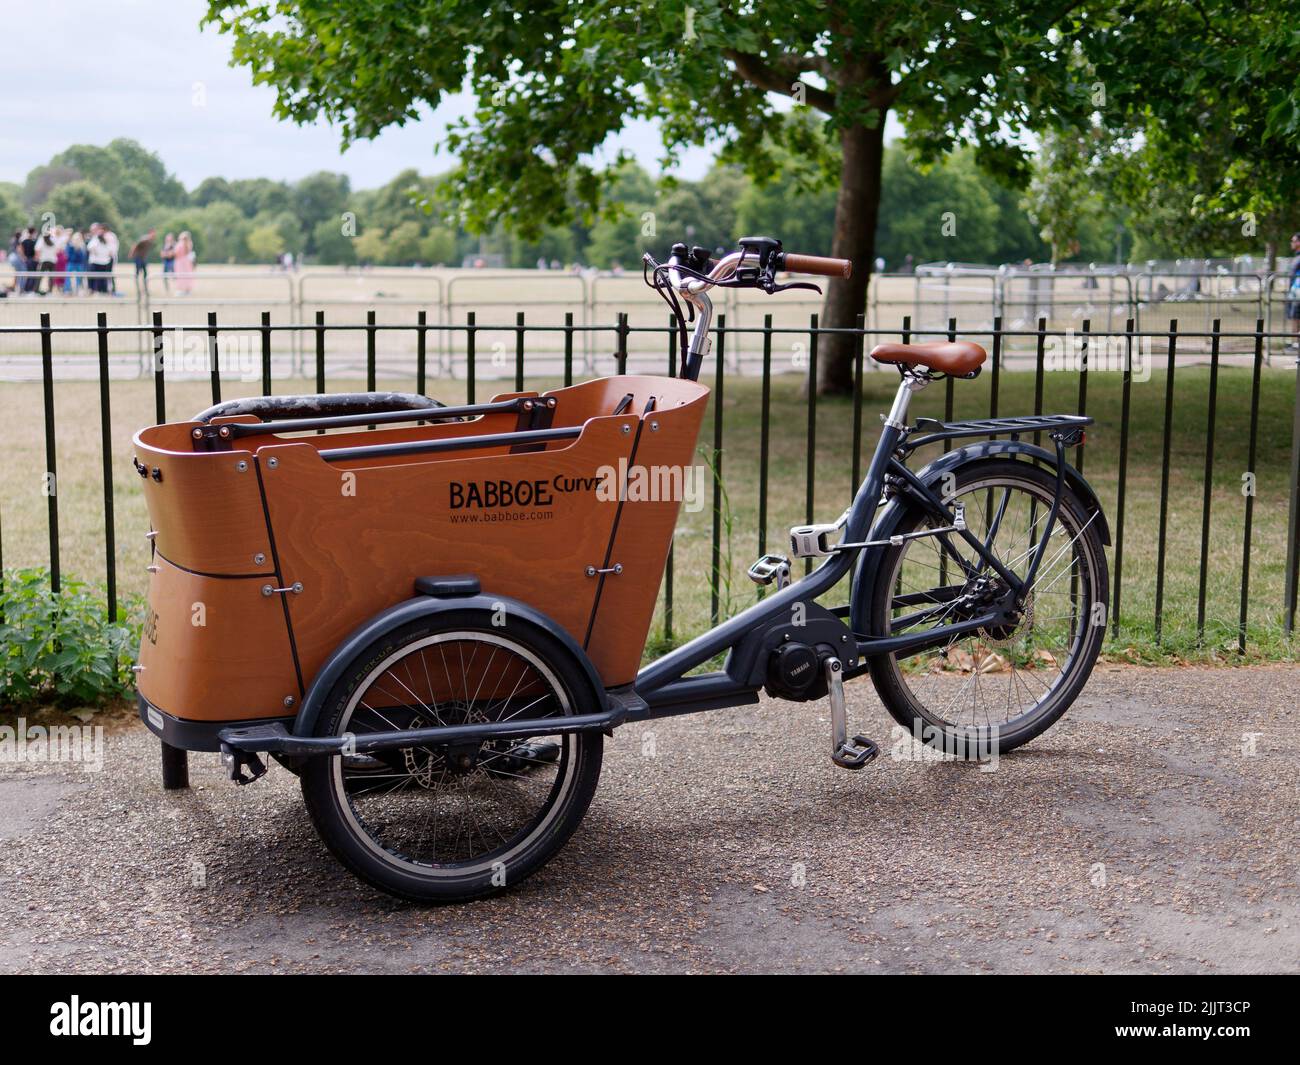 London, Greater London, England, June 30 2022: Electric Babboe Curve three wheel cargo bike with wooden storage or seating area at the front. Hyde Par Stock Photo